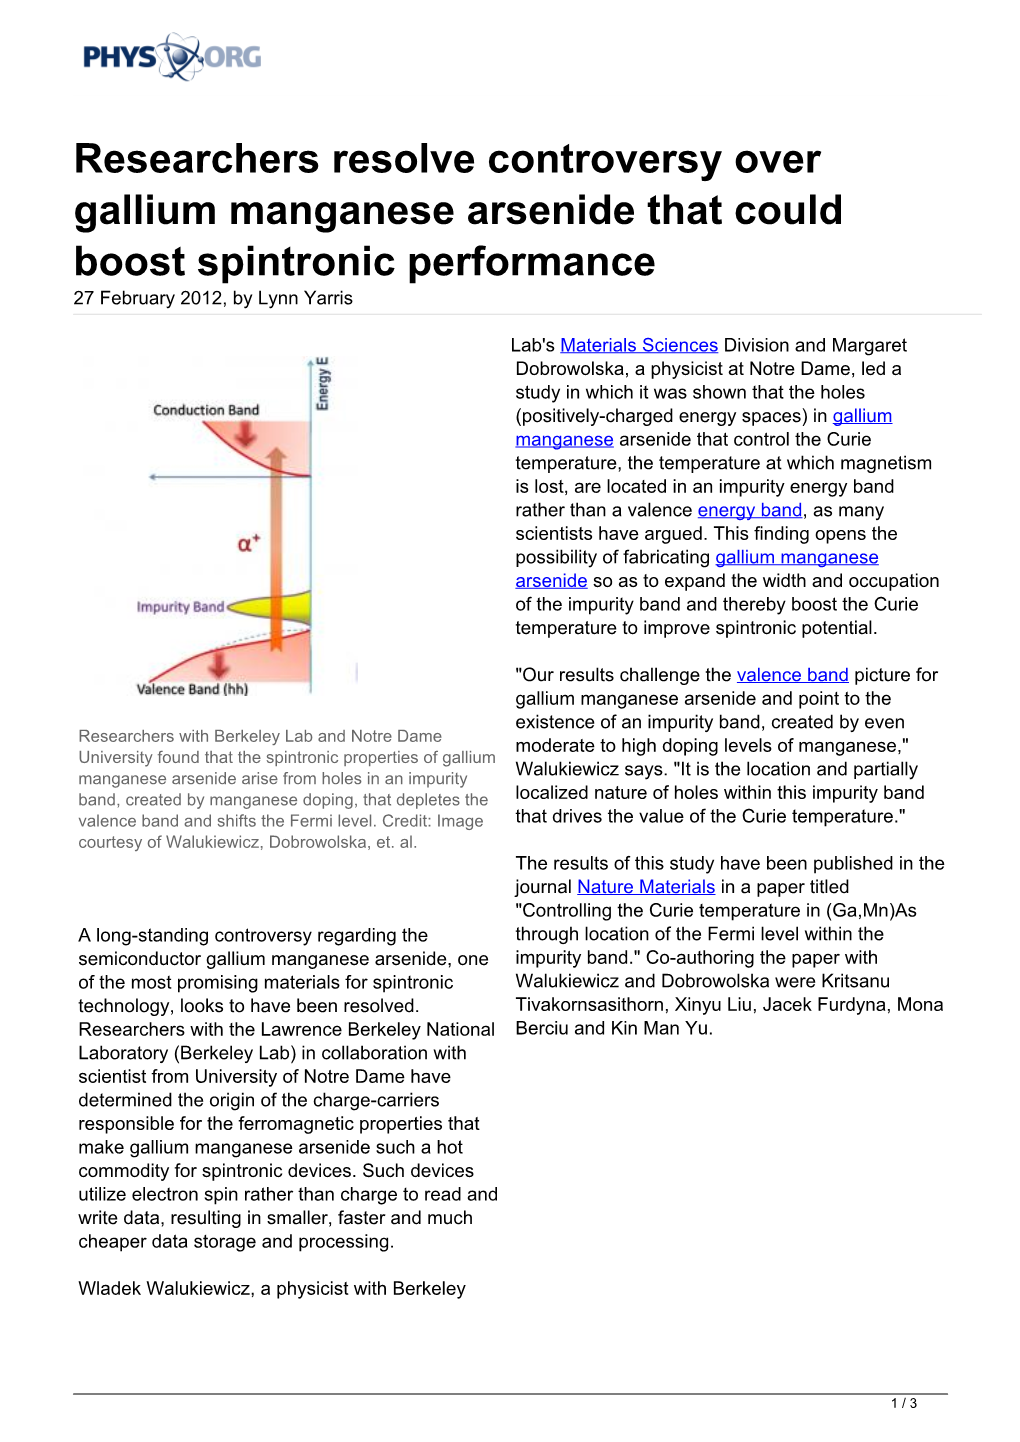 Researchers Resolve Controversy Over Gallium Manganese Arsenide That Could Boost Spintronic Performance 27 February 2012, by Lynn Yarris